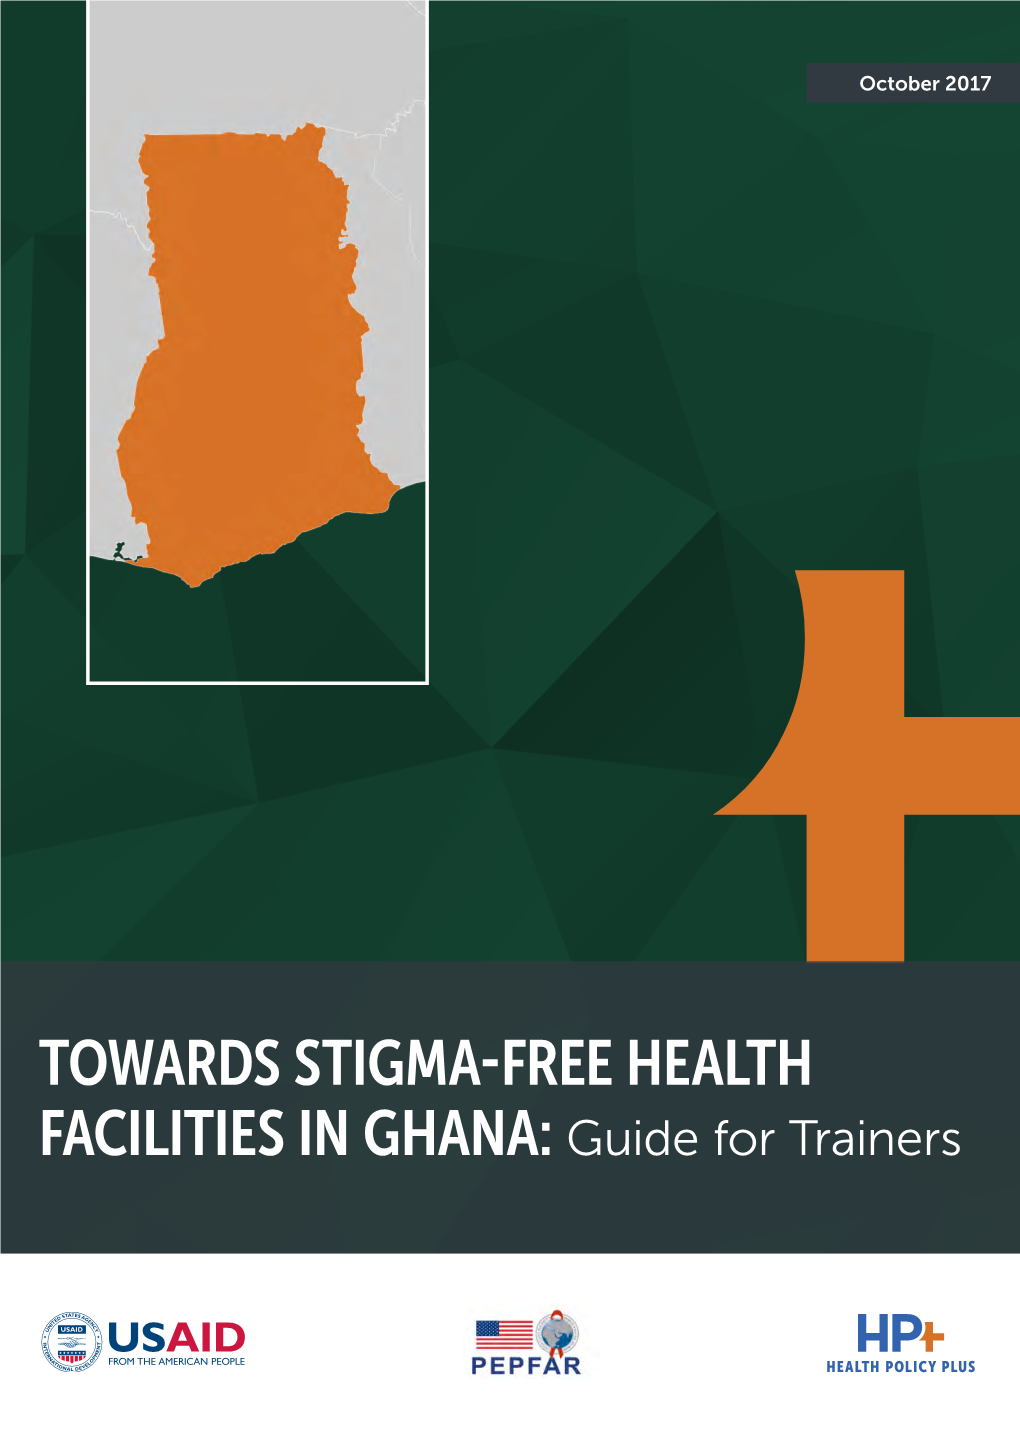 TOWARDS STIGMA-FREE HEALTH FACILITIES in GHANA: Guide for Trainers